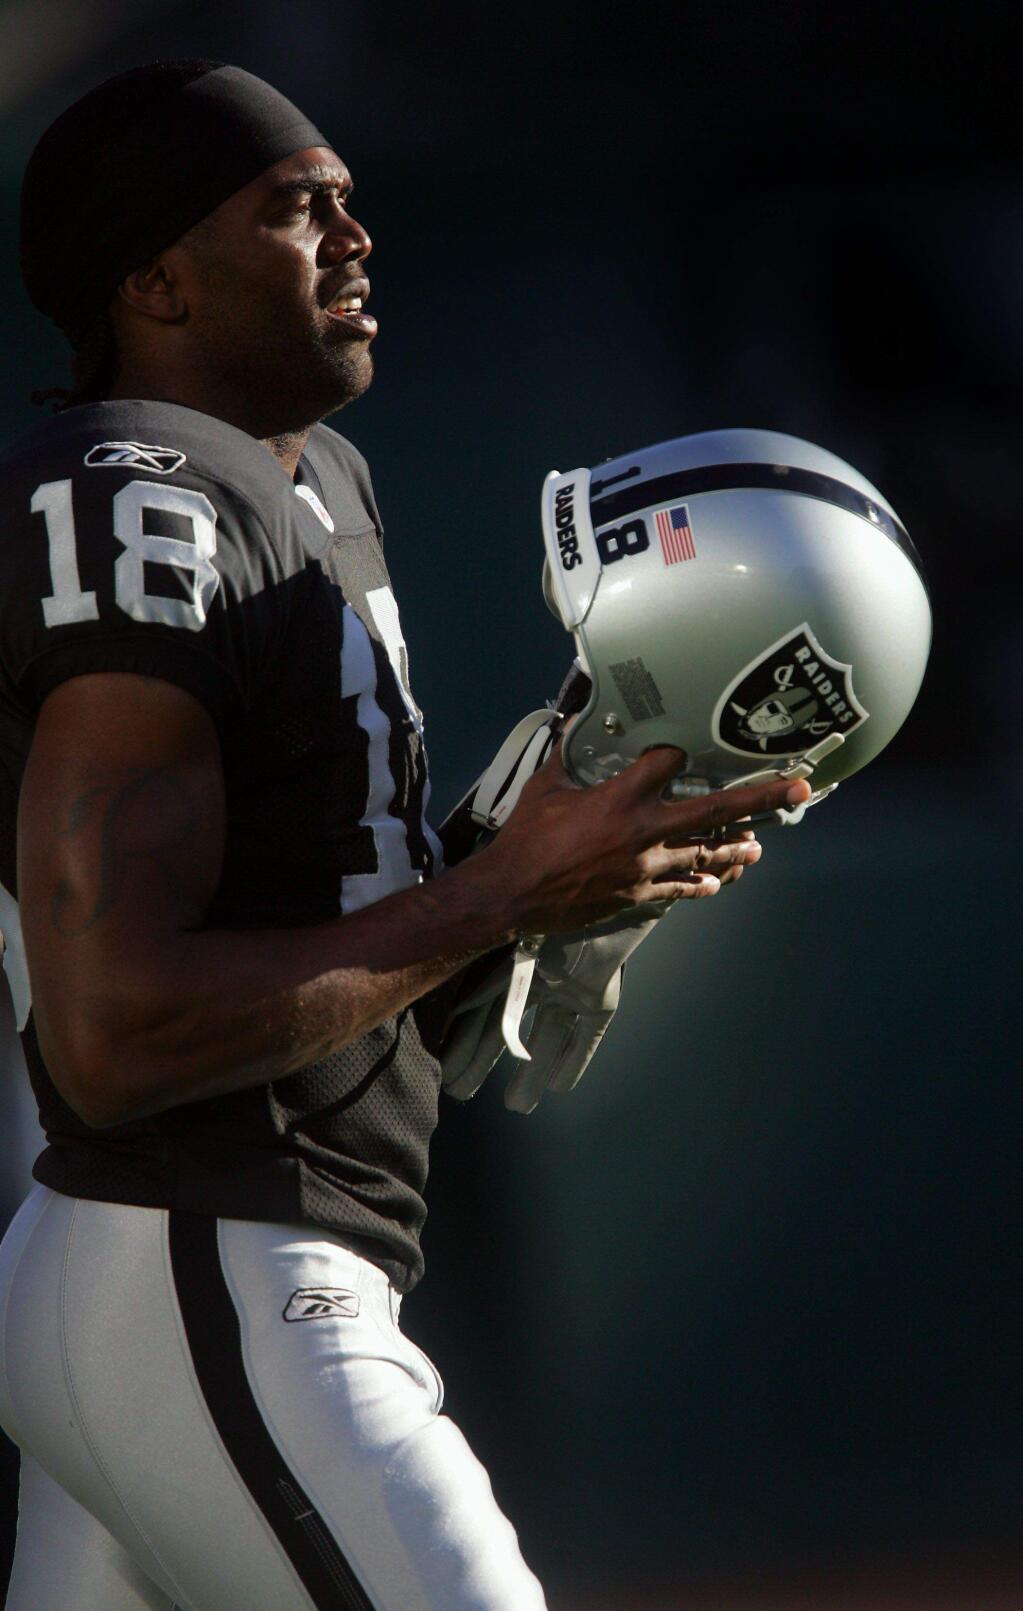 Oakland Raiders receiver Randy Moss readies for an NFL pre-season football game against the Detroit Lions on Friday, Aug. 25, 2006, in Oakland, Calif. (AP Photo/Marcio Jose Sanchez)